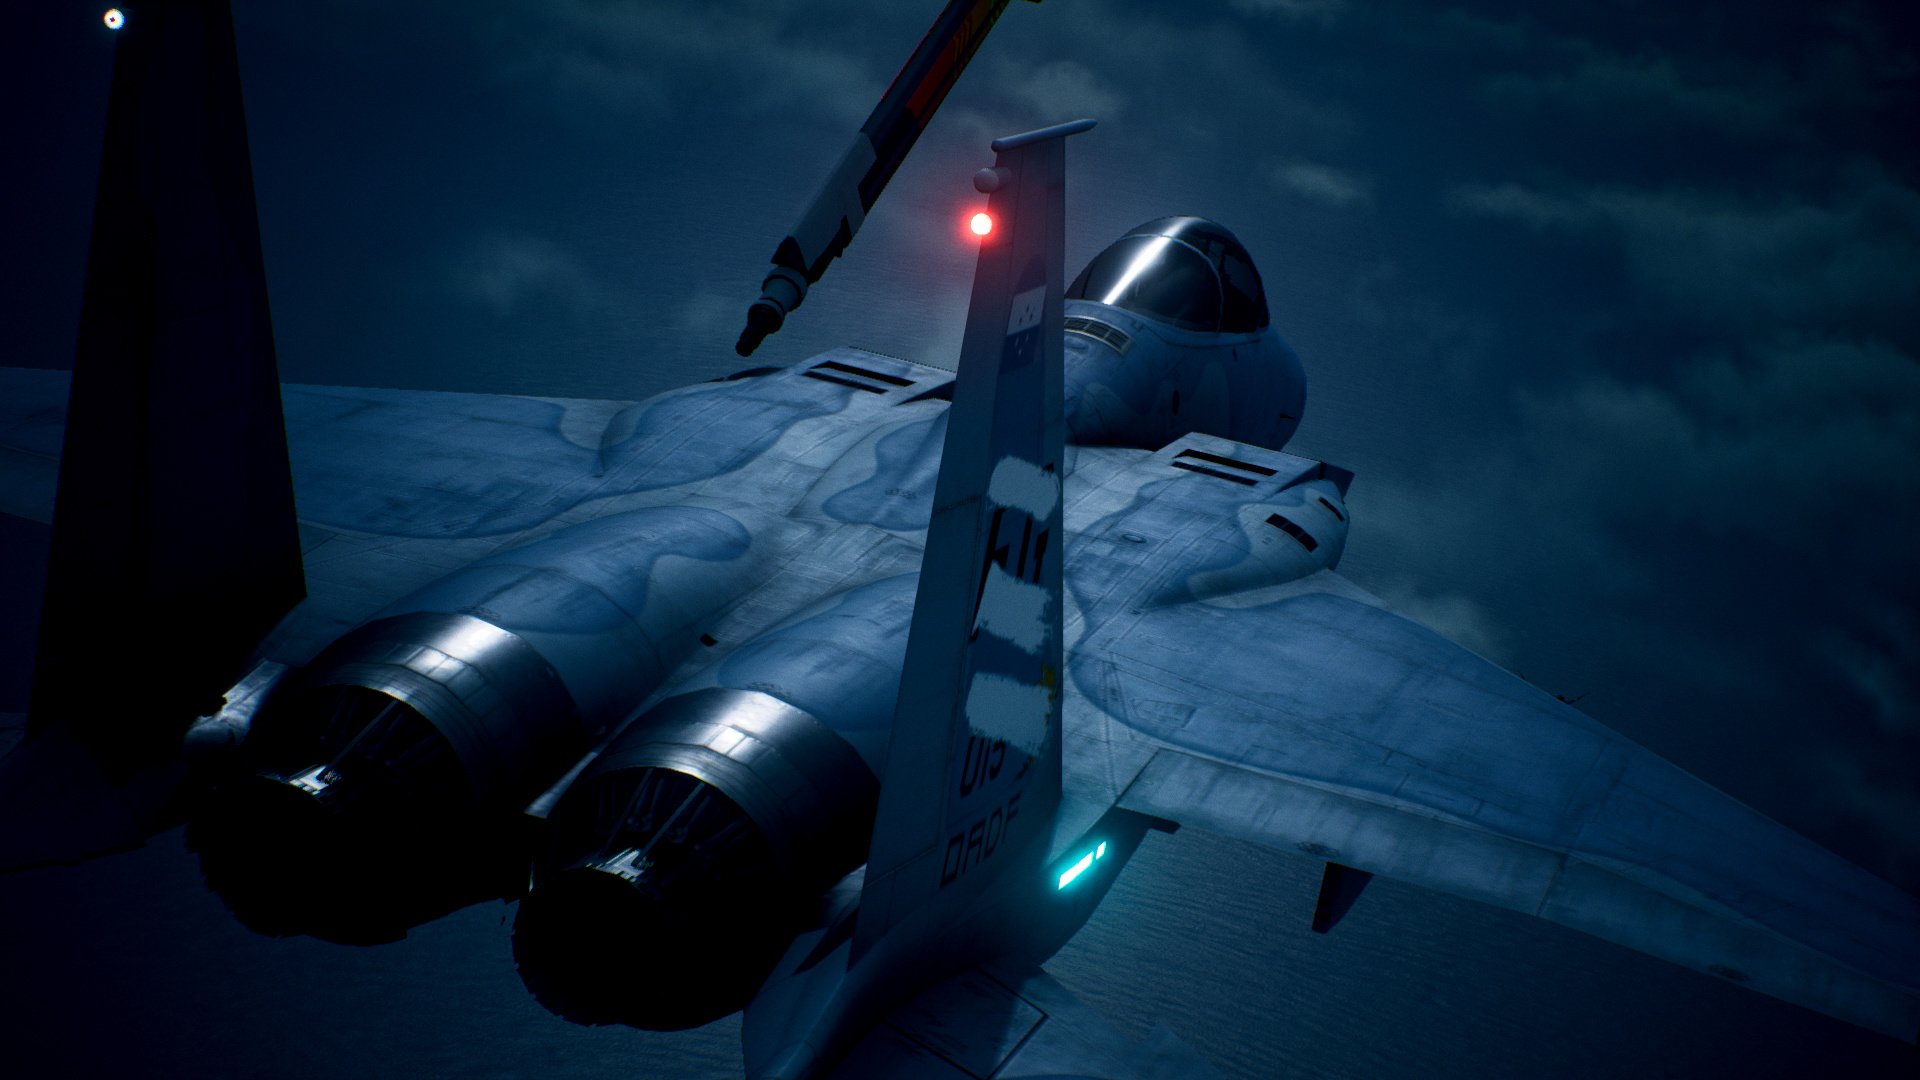 Ace Combat 7: Skies Unknown Review (PS4)